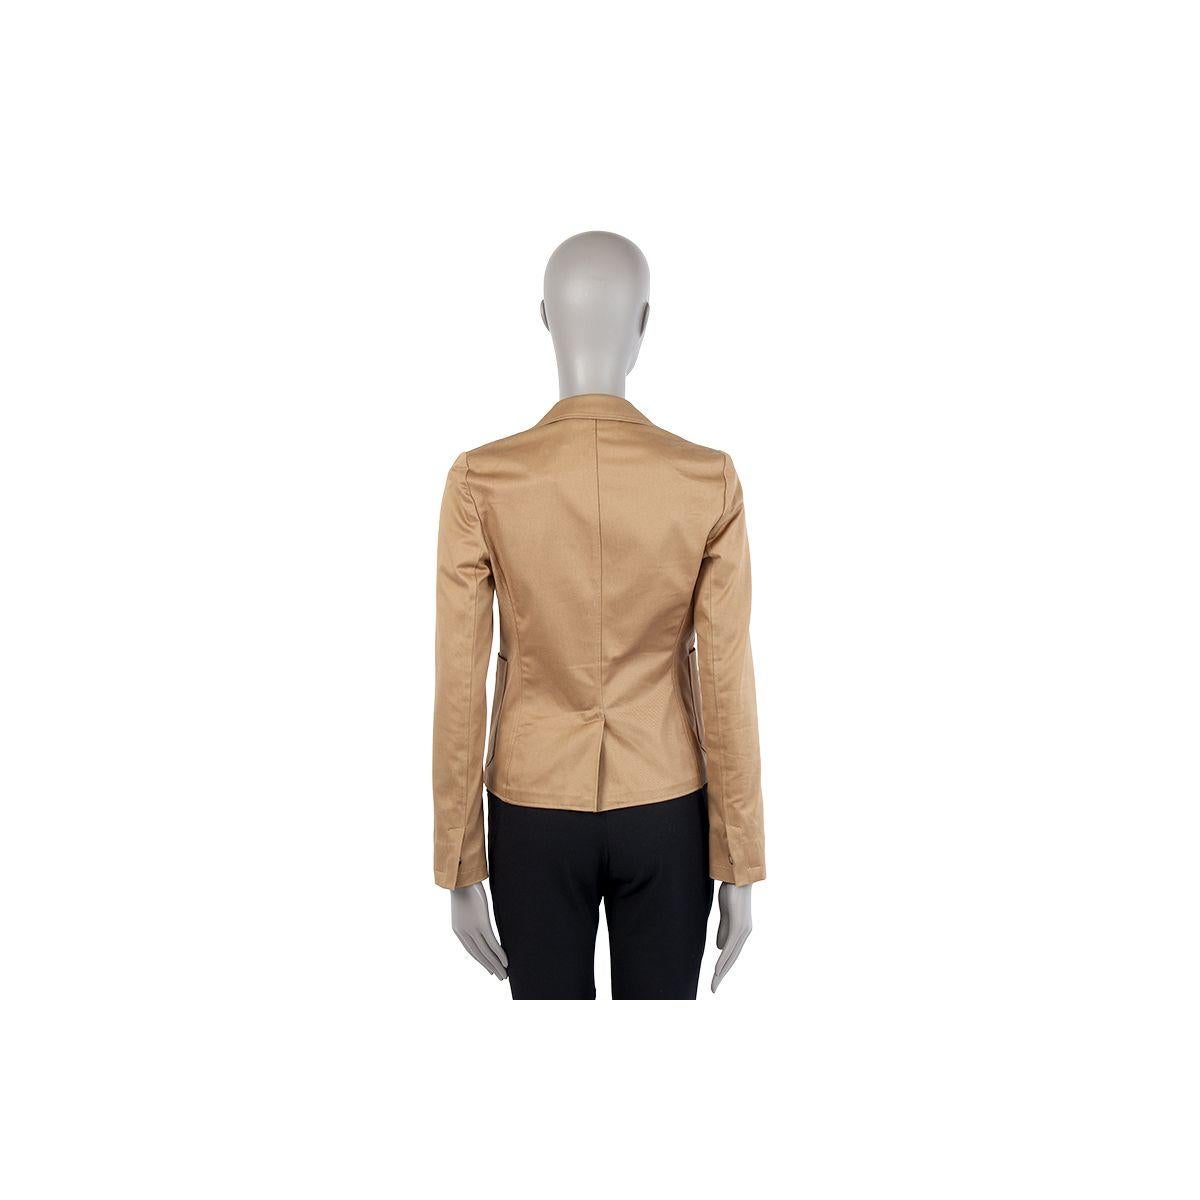 100% authentic Prada classic blazer in ochre cotton (98%) and the refiners (2%). With notch collar and three front patch pockets. Closes with three front horn buttons and invisible button on the cuffs. Sleeves lined in ochre satin fabric. Has been